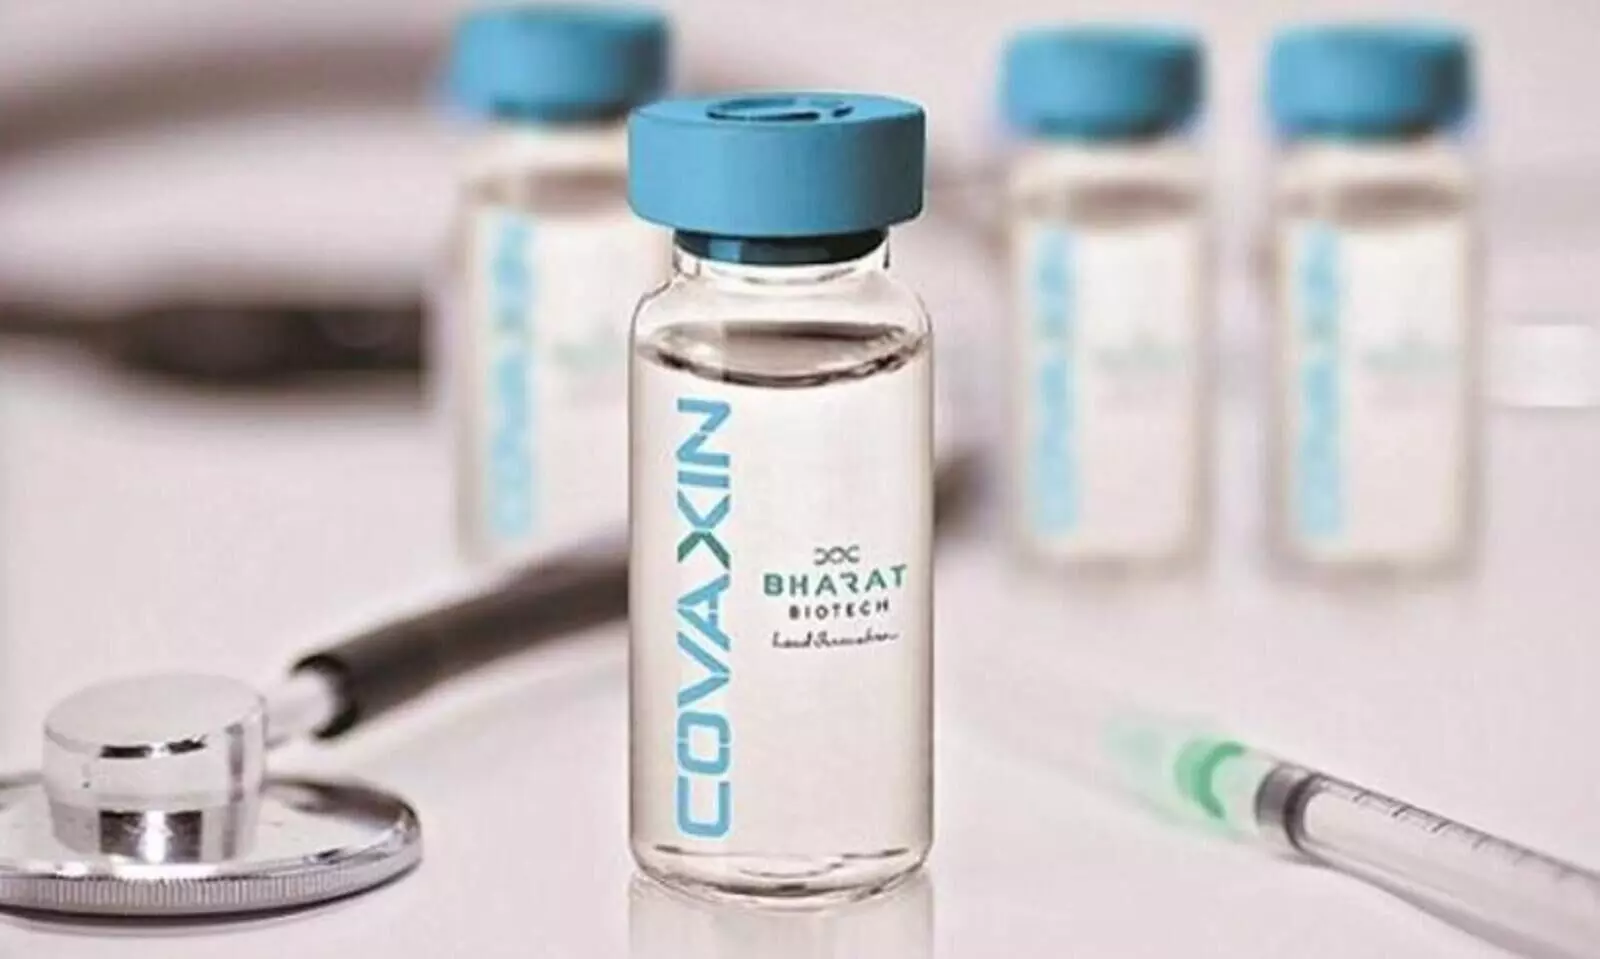 Bharat Biotechs fact-sheet warns people with medical conditions not to take the vaccine